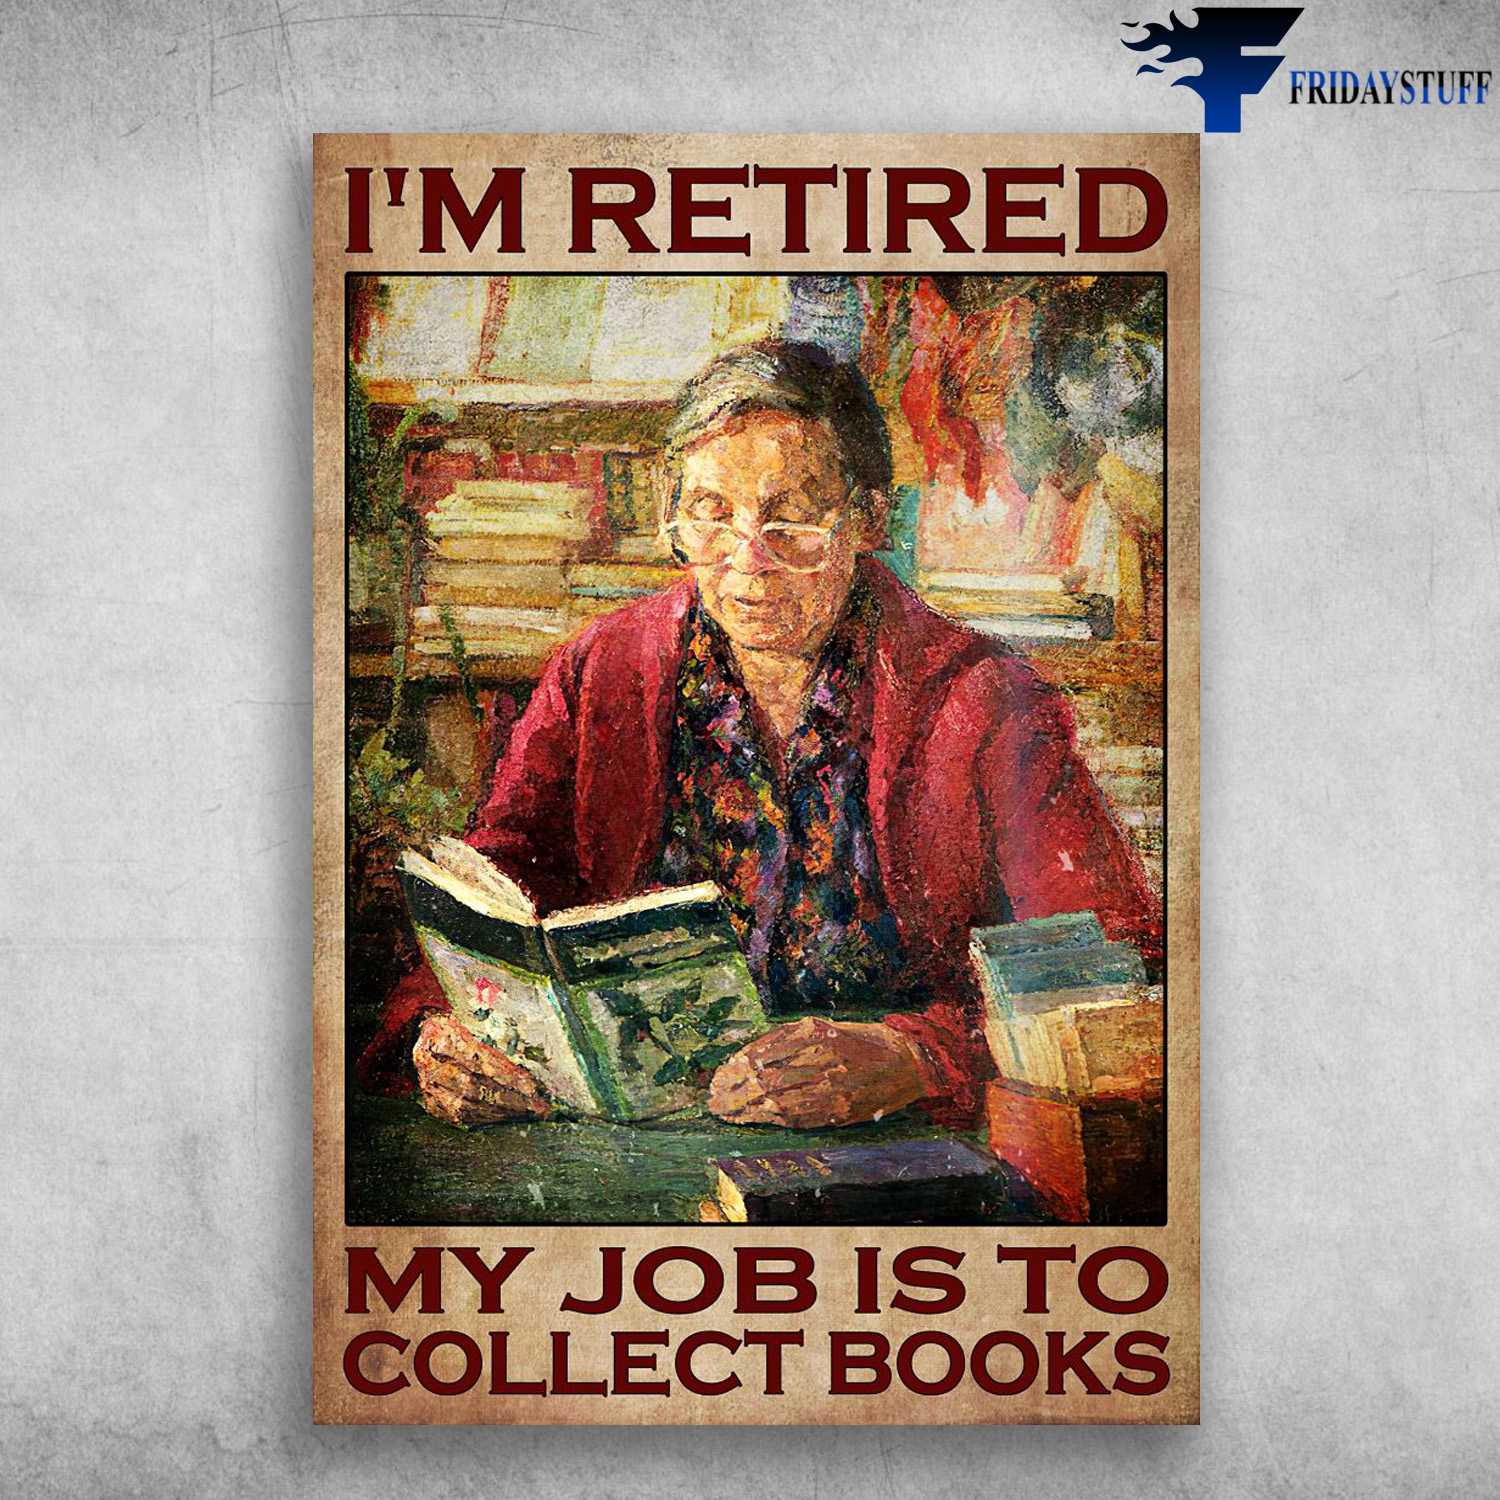 Old Woman Reading - I'm Retired, My Job Is To Collect Books